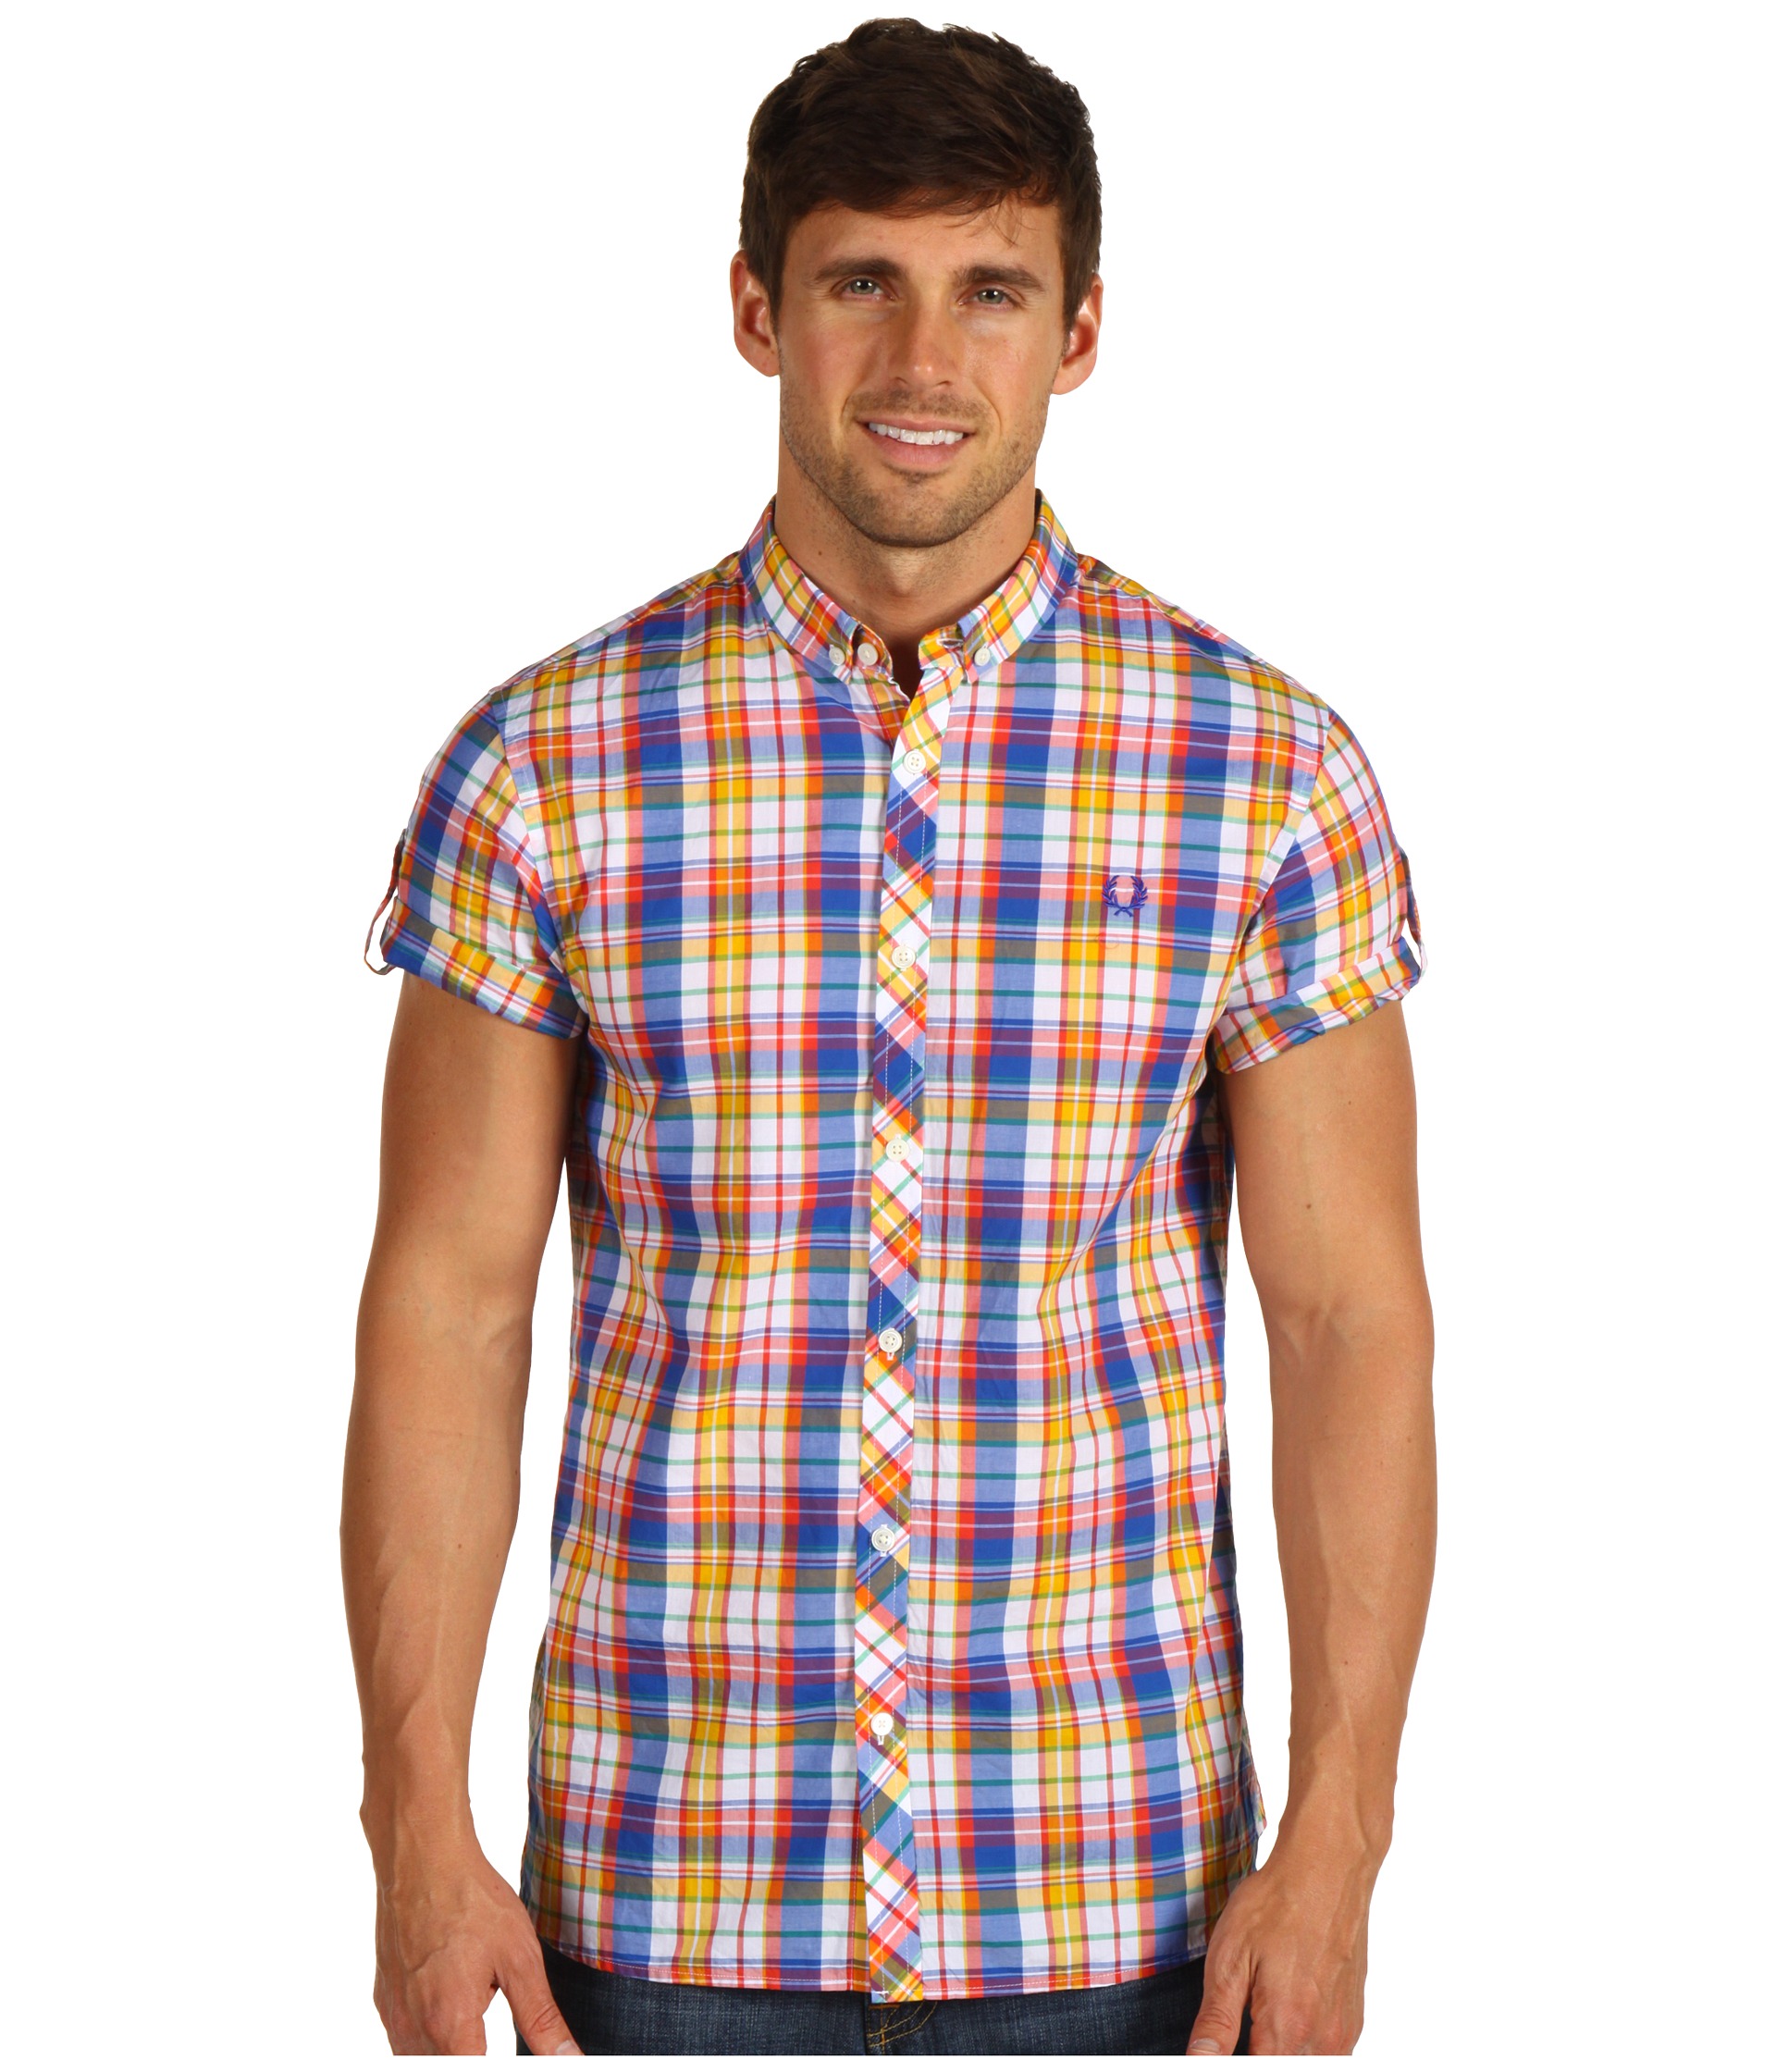 Fred Perry Summer Madras Shirt $74.99 (  MSRP $125.00)